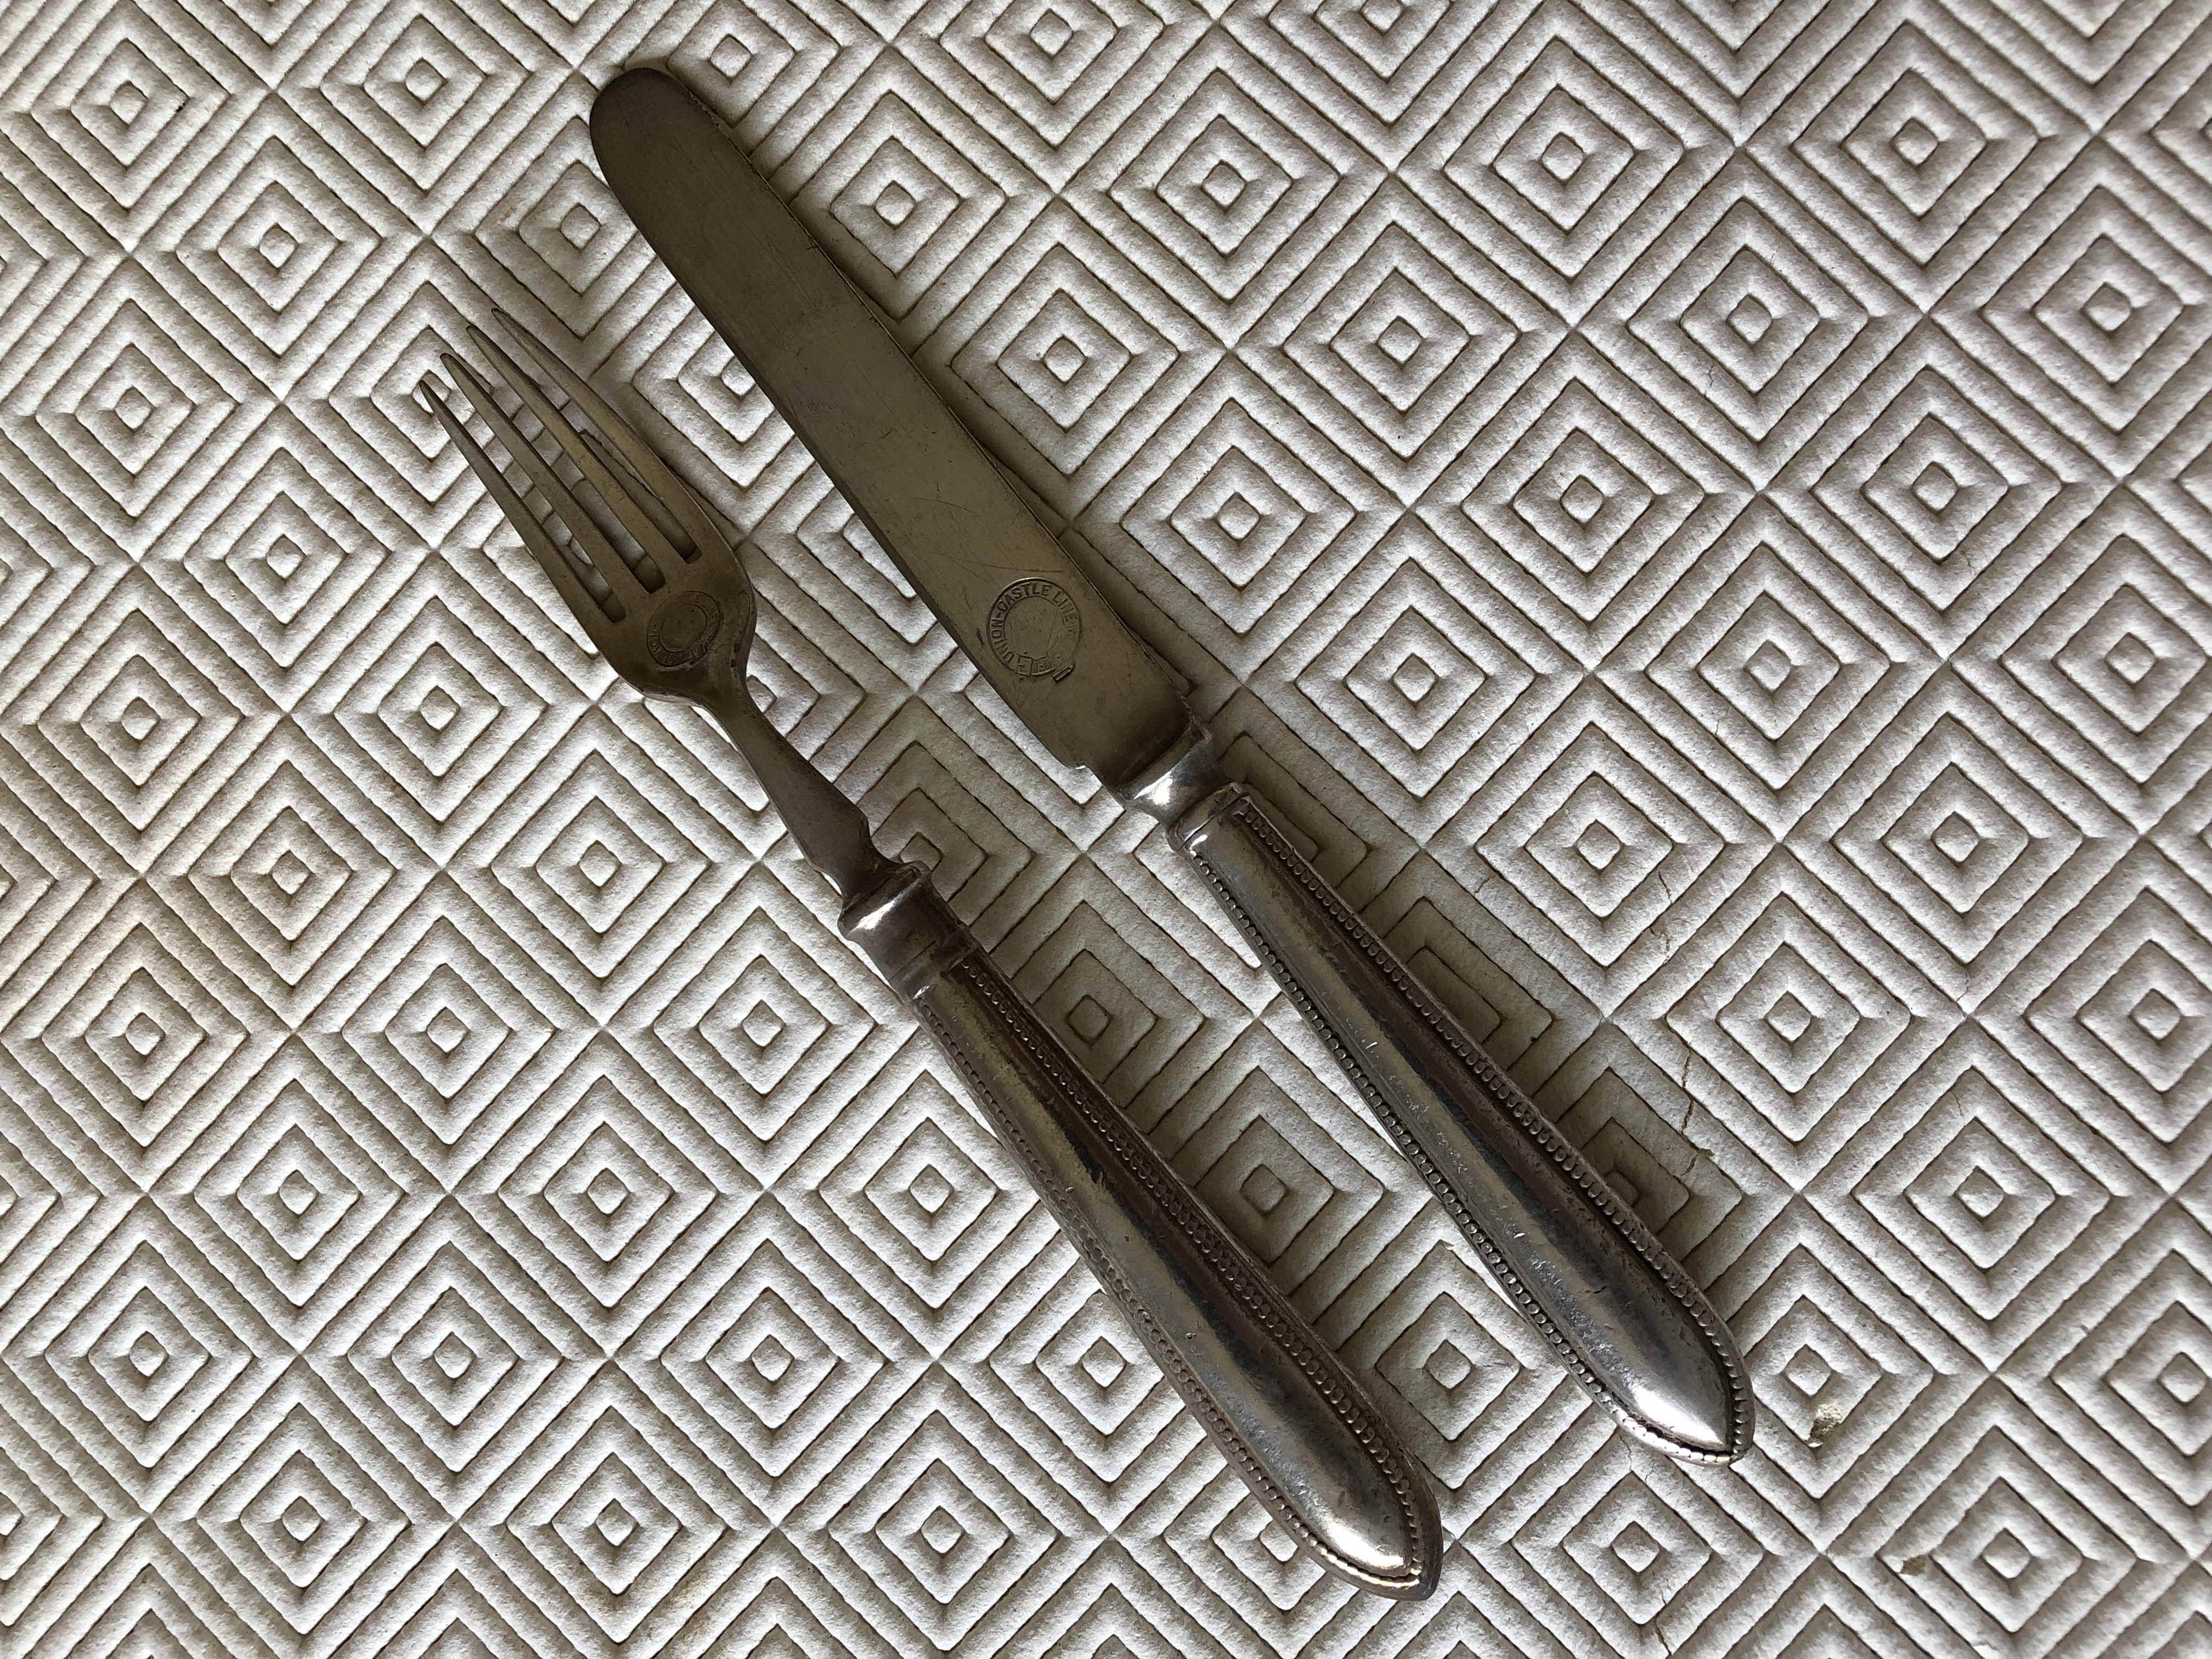 AS USED IN SERVICE SHIPS DINING KNIFE AND FORK FROM THE UNION CASTLE LINE